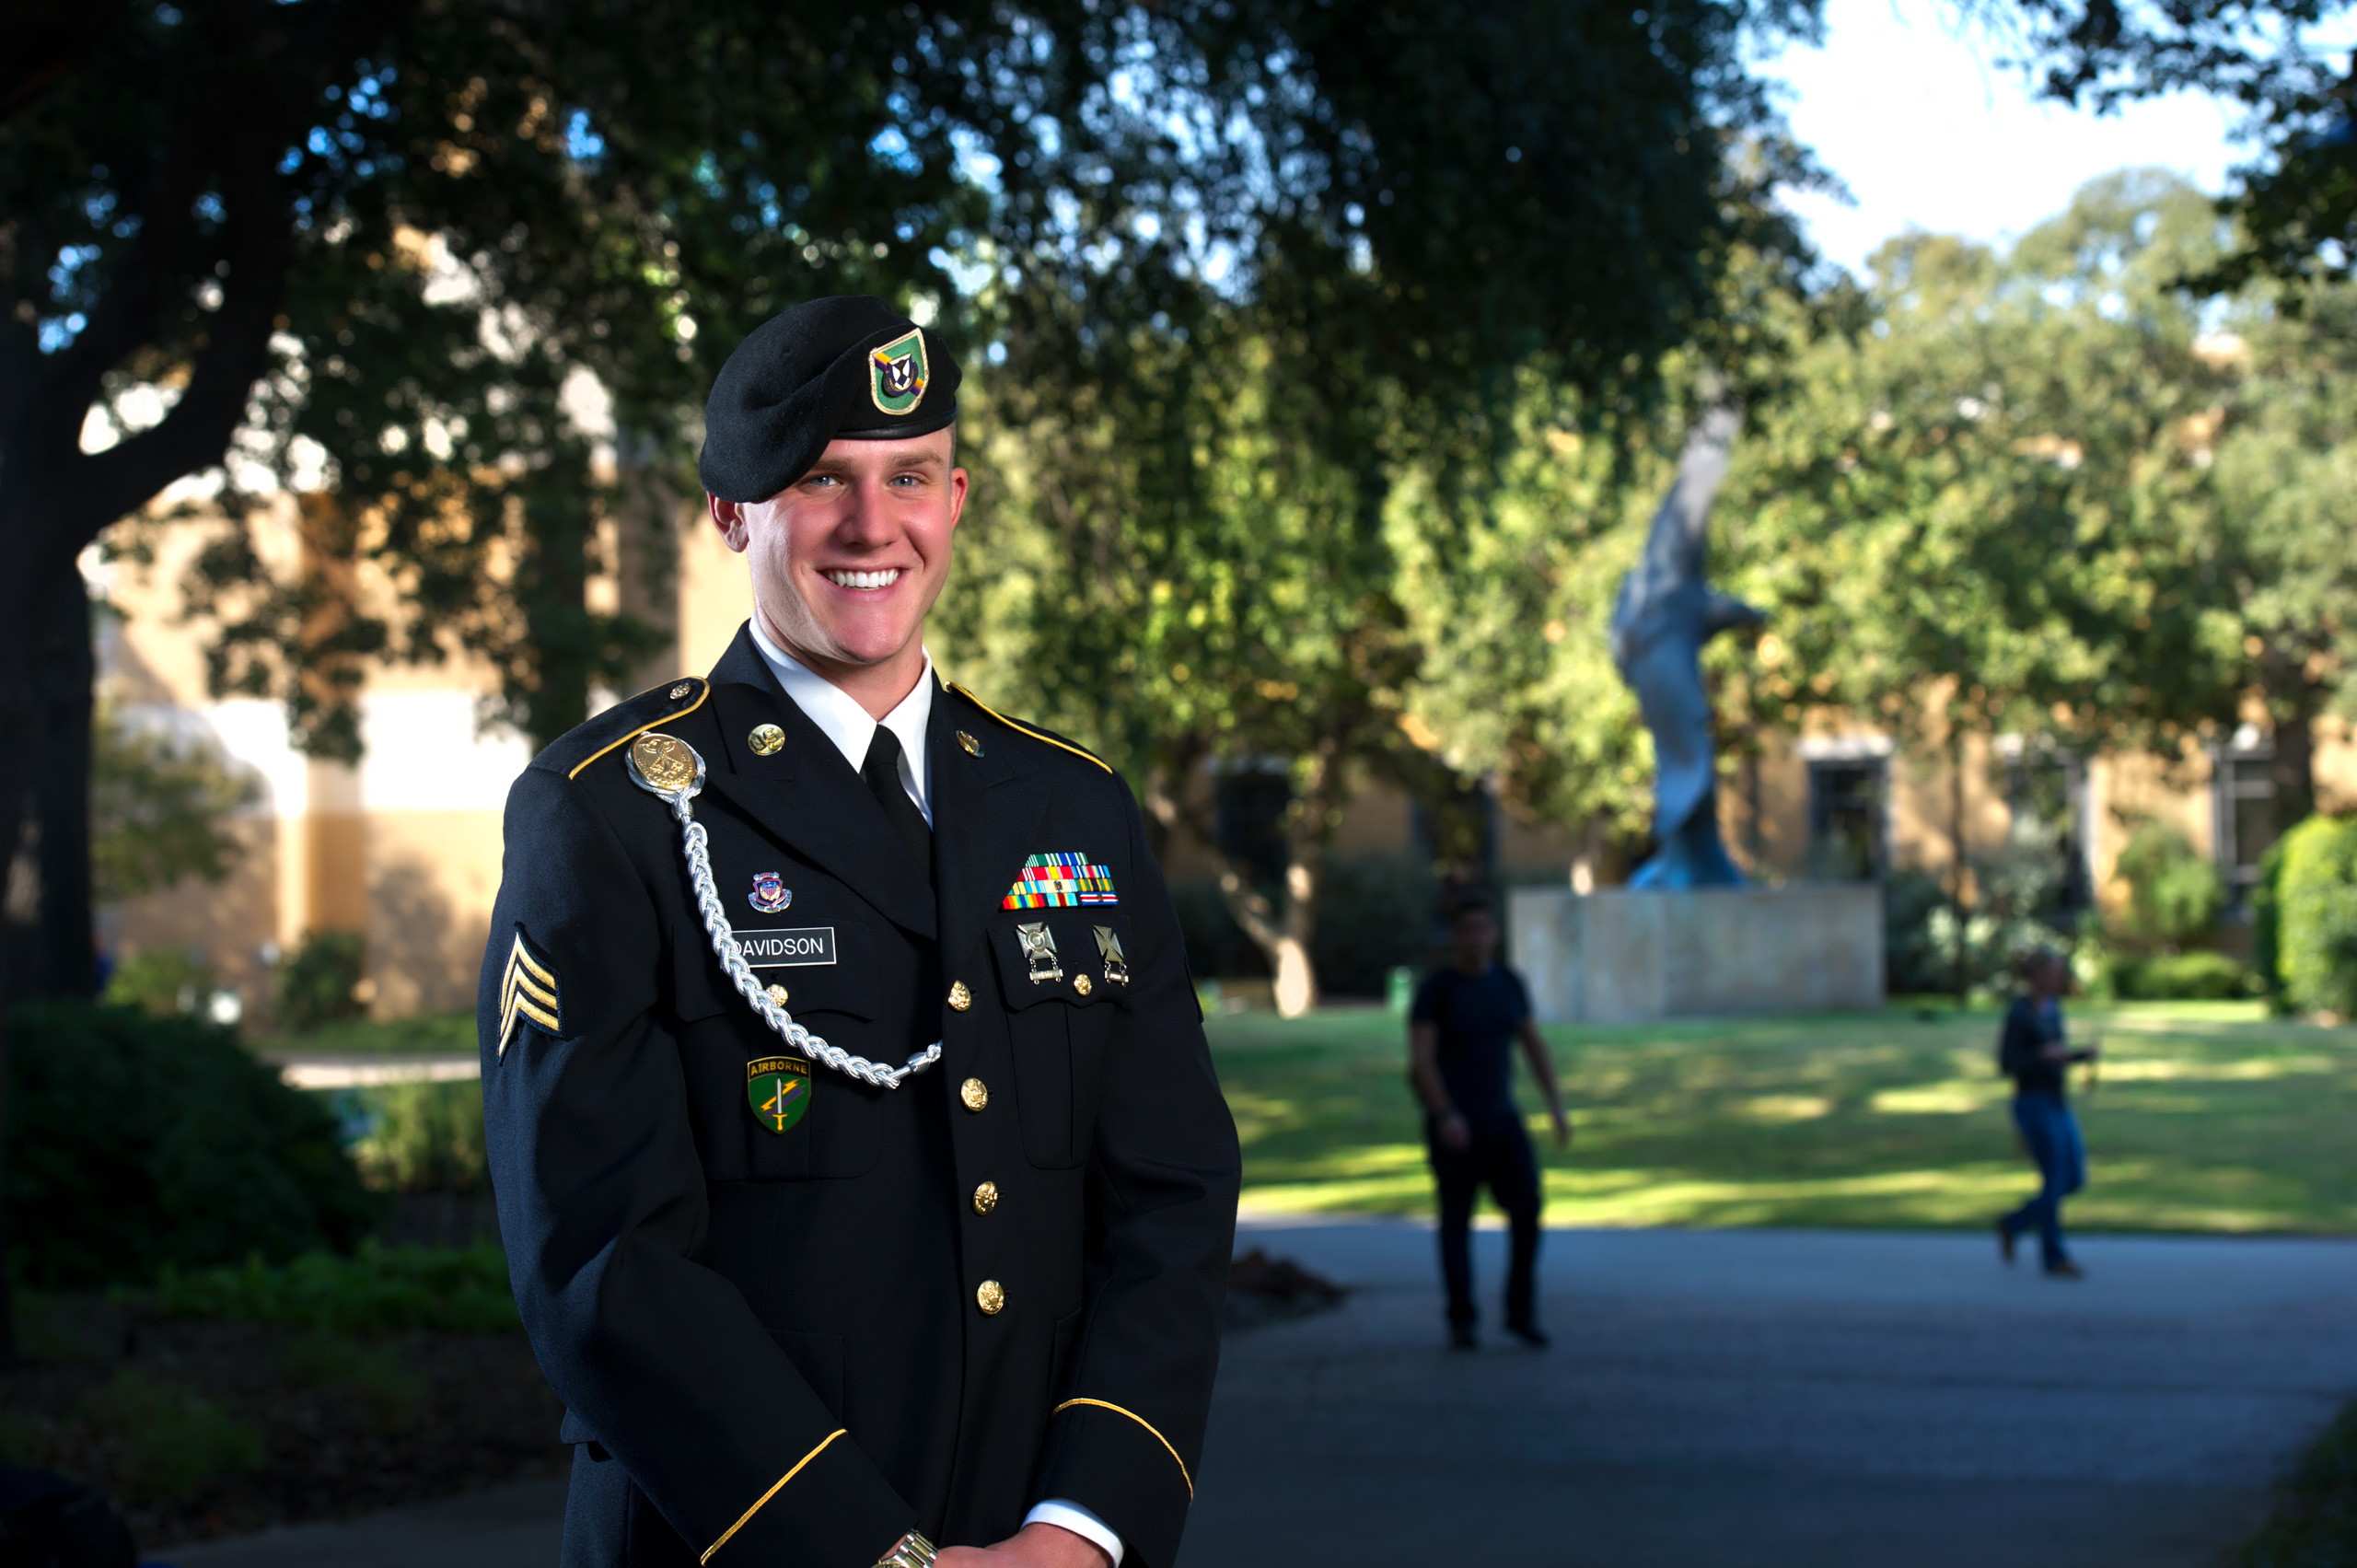 Soldier of the Year, who saved comrade's life, to speak at UNT's University-wide commencement 